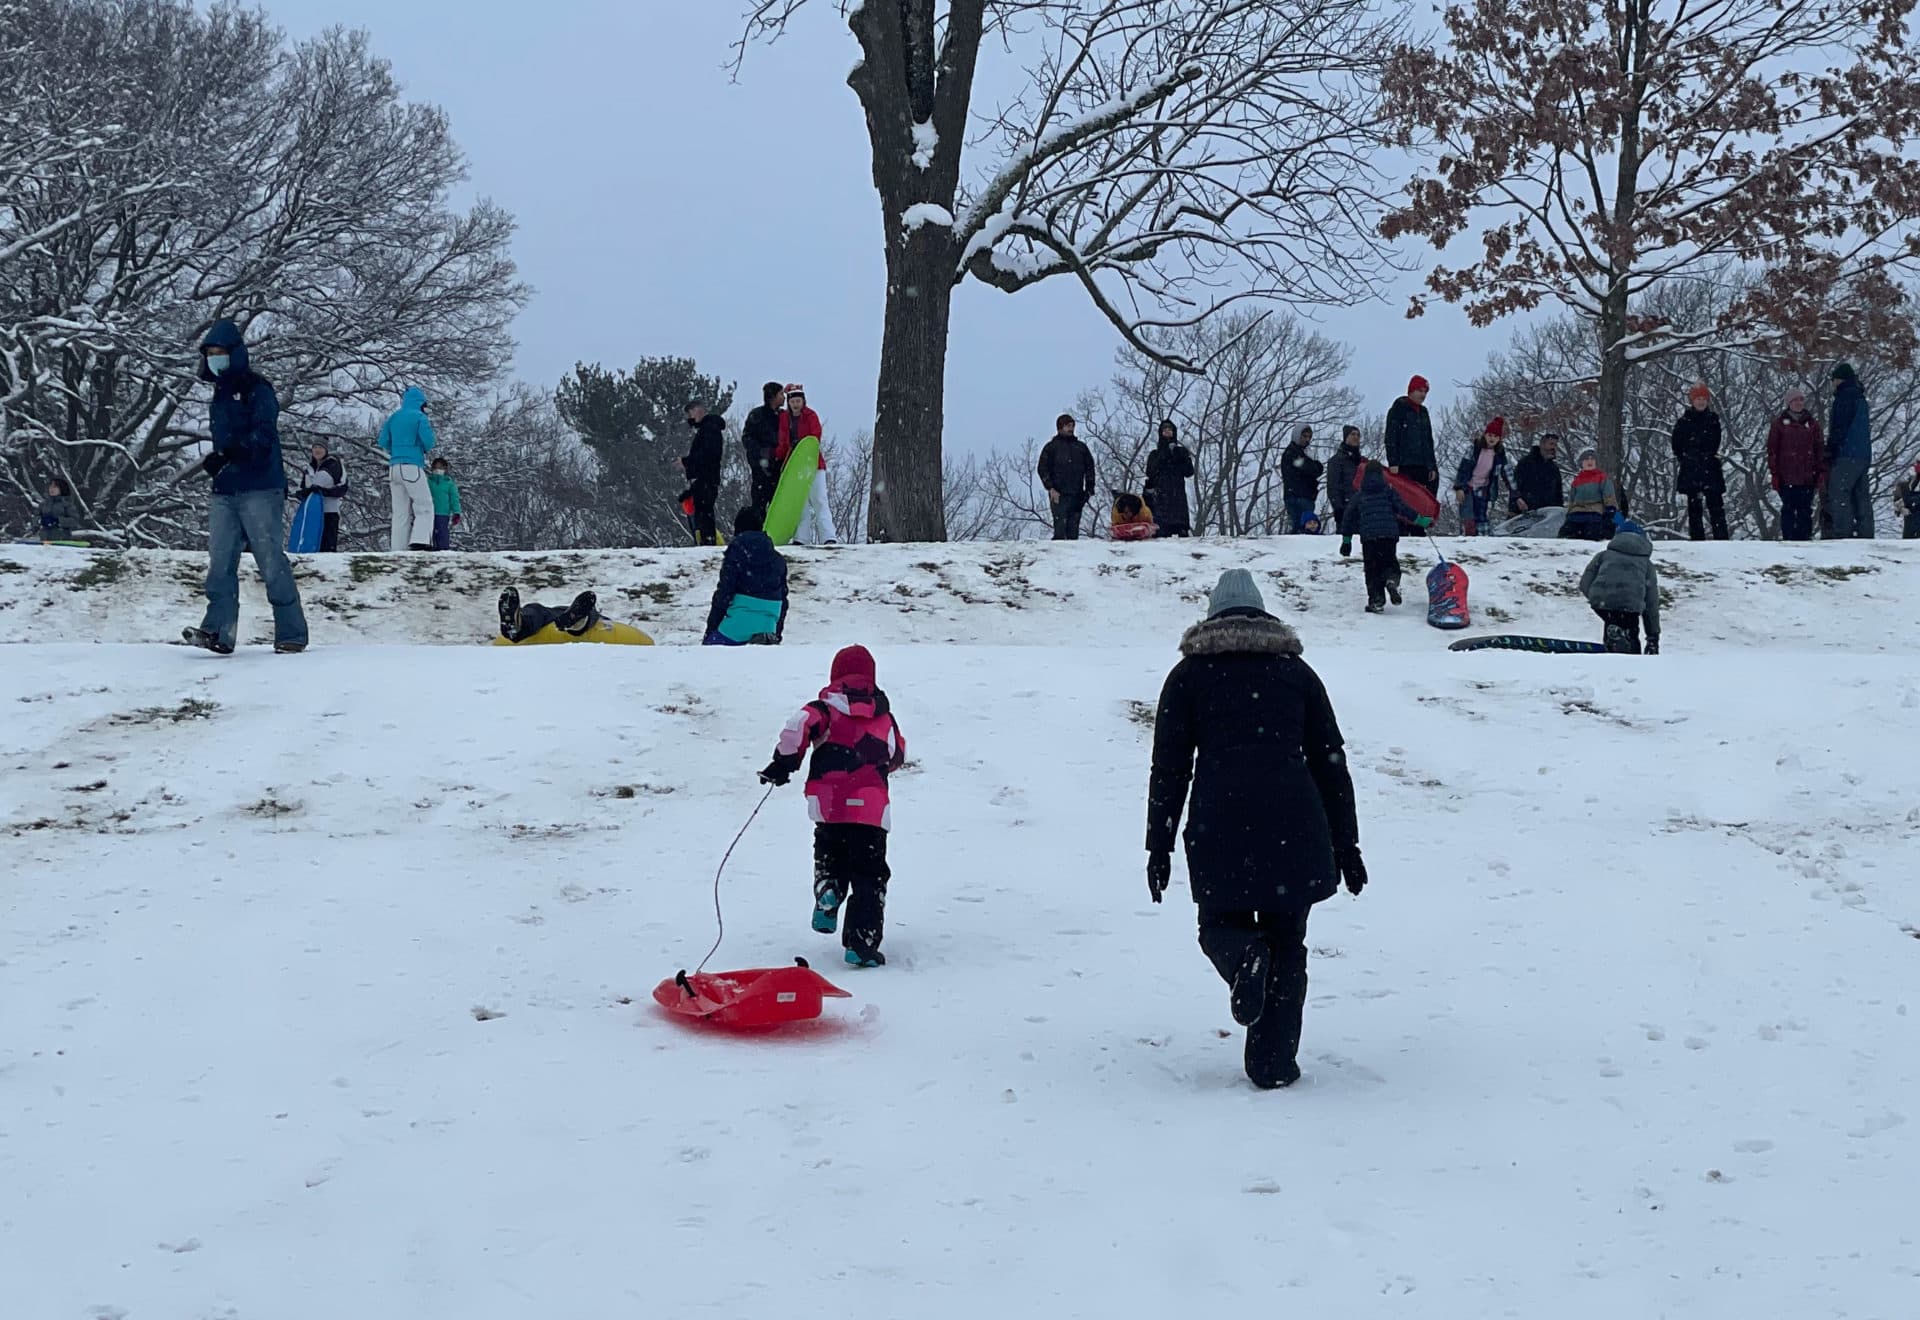 The sledders included kids of all ages — and some parents too. One parent called the scene &quot;a bit of hope&quot; after a chaotic week (Max Larkin/WBUR).